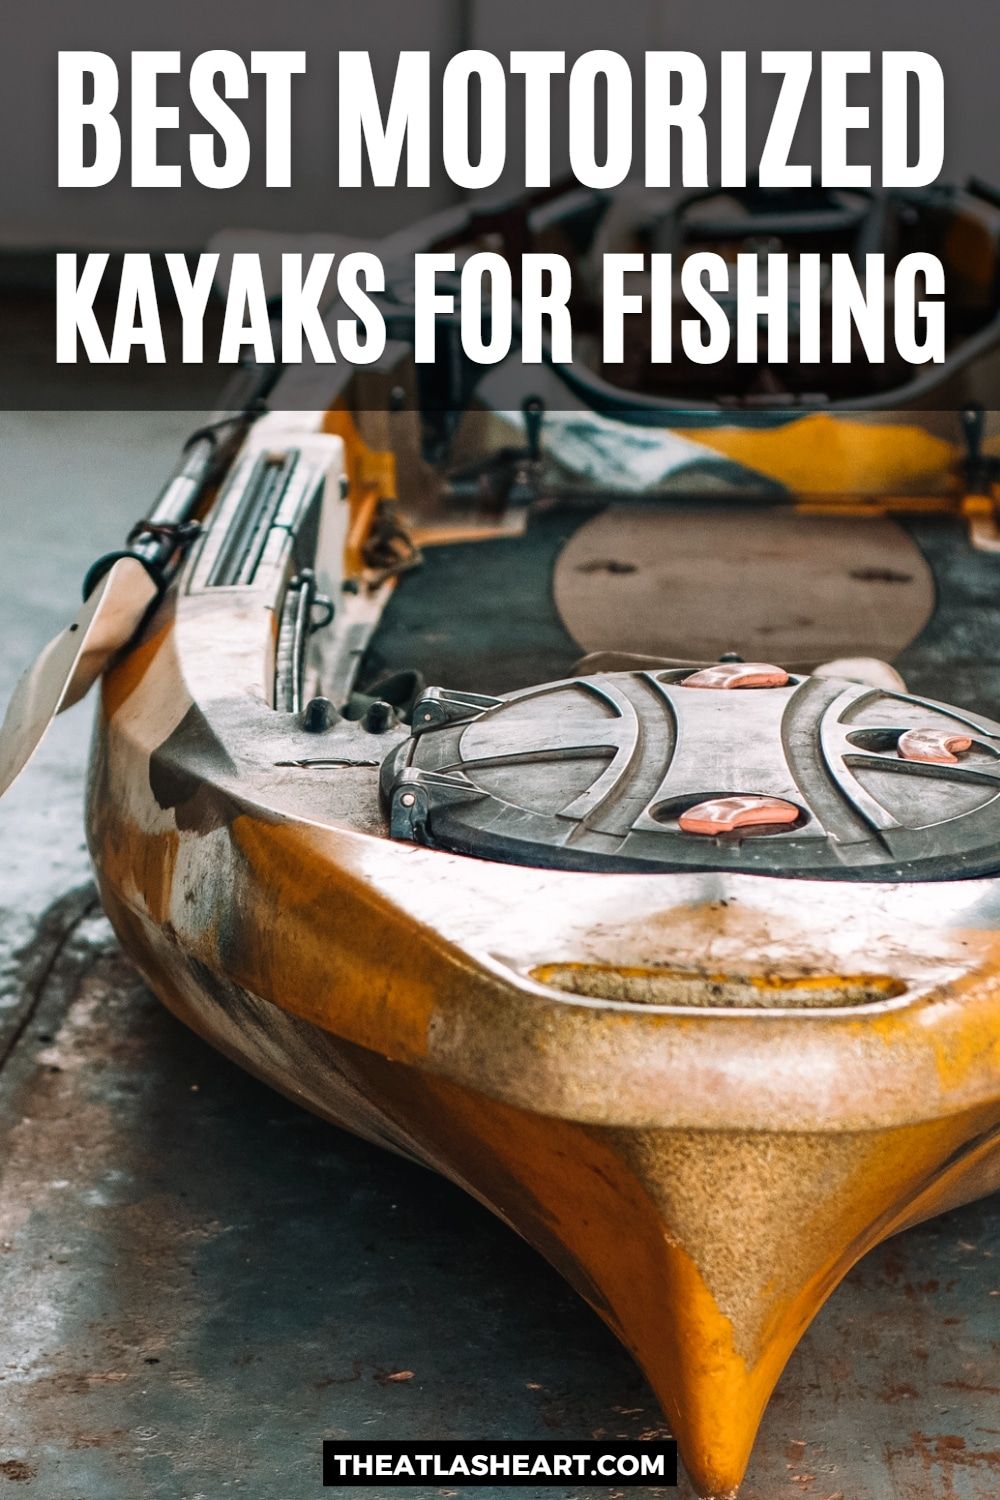 The 15 BEST Motorized Kayaks for Fishing With Ease [2023]